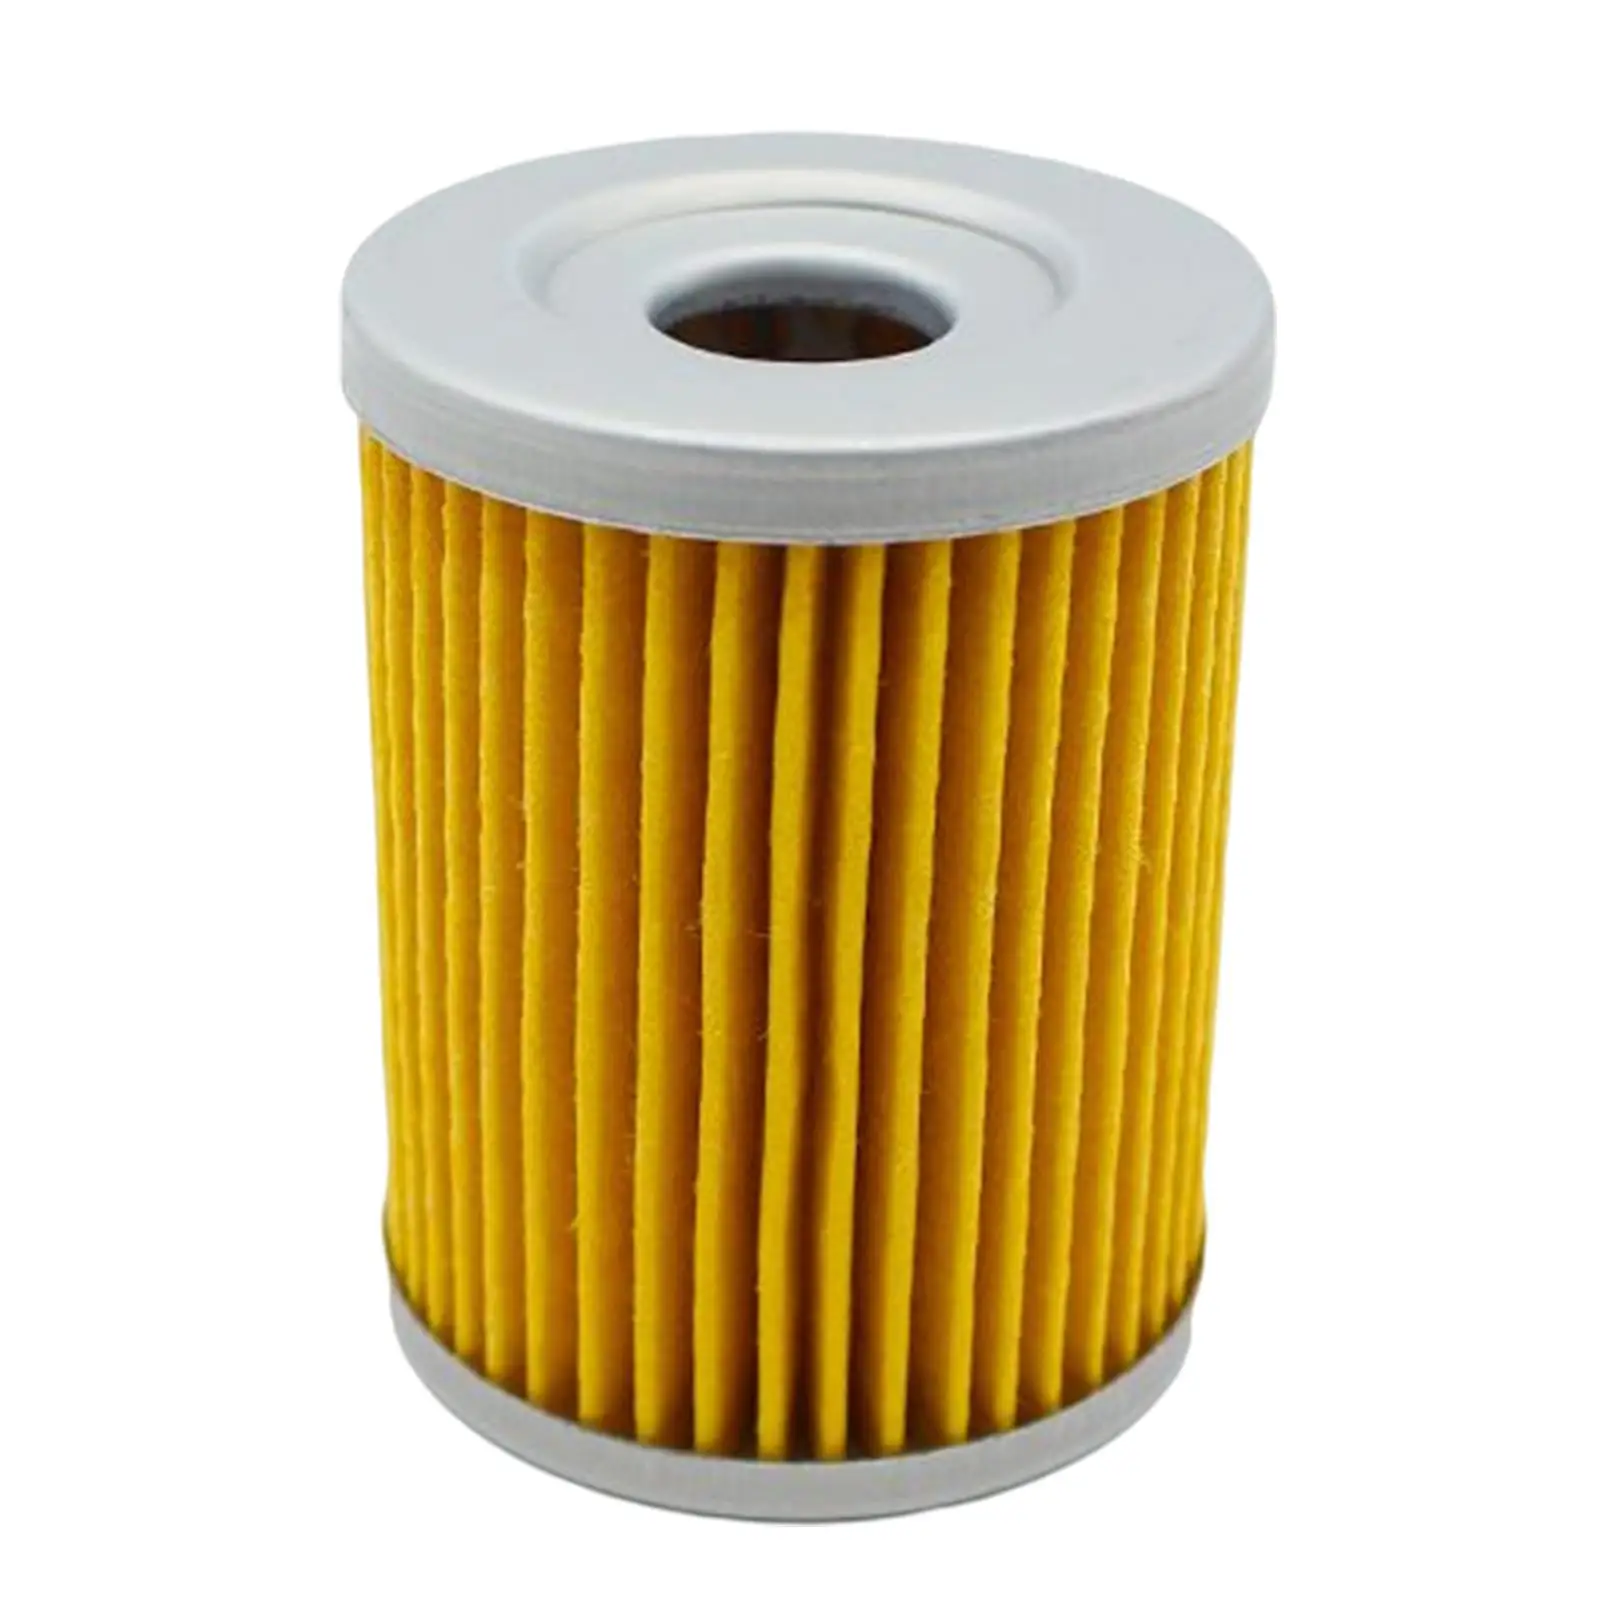 Motorcycle Oil Filter Replace Parts for 250 300 YP400 AN 250 Majesty Klx125 Durable Premium